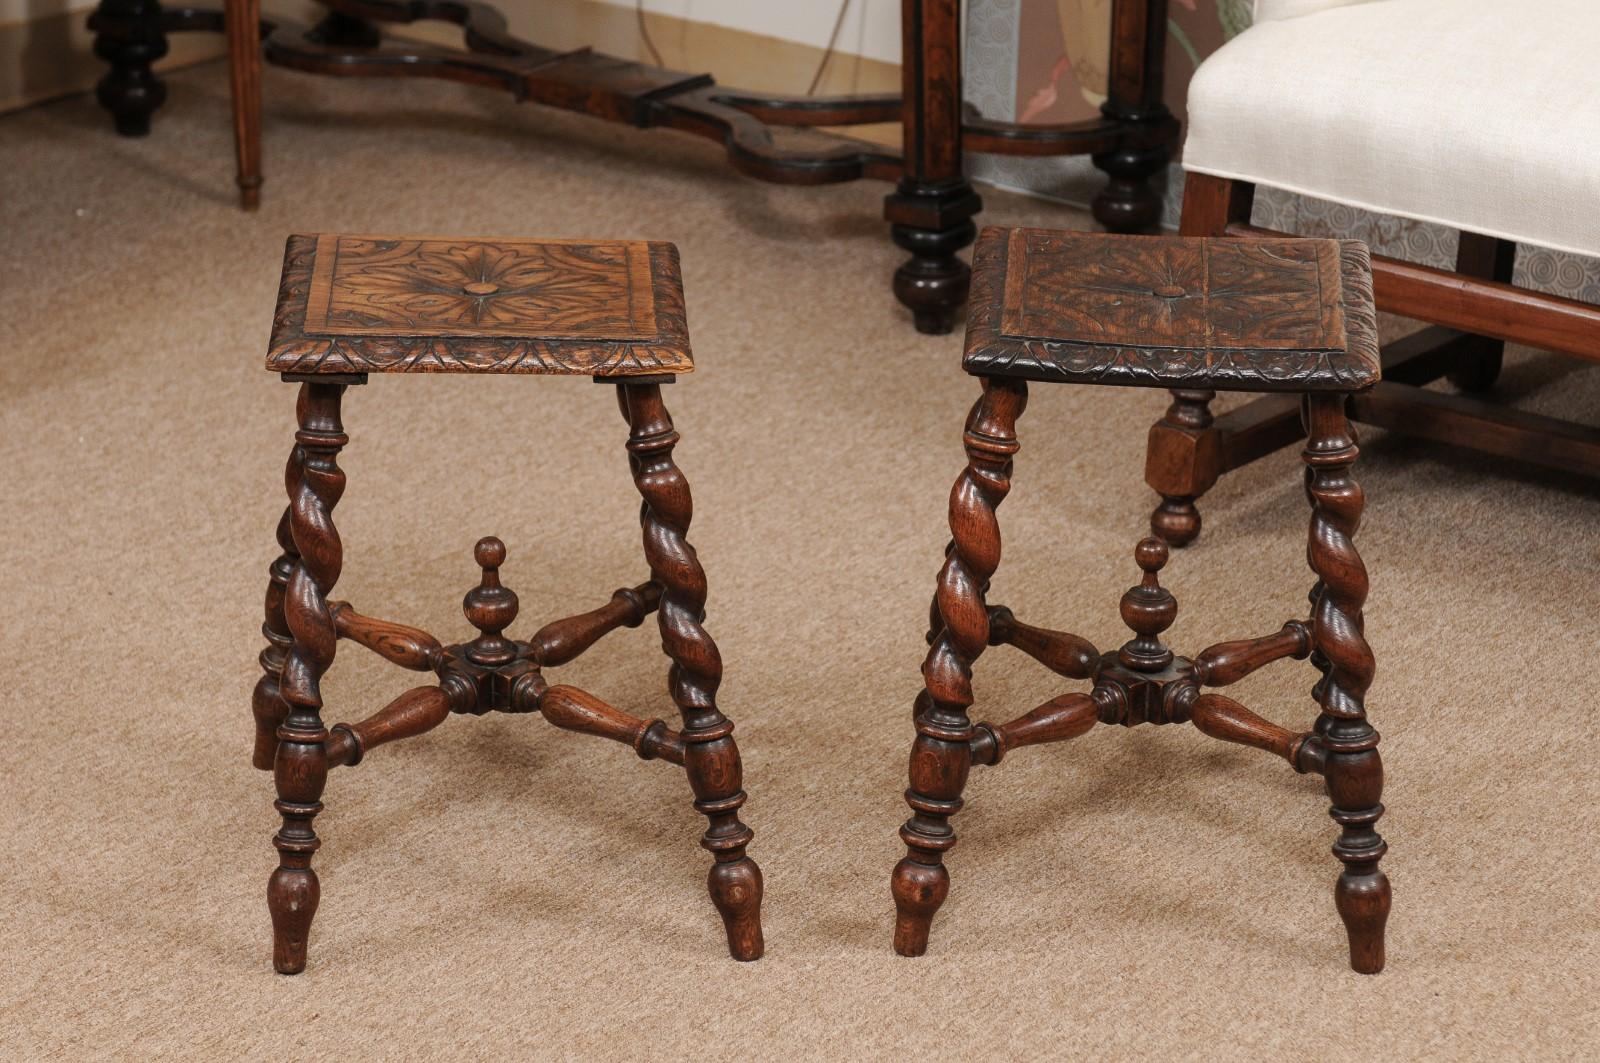 The pair of early 19th century Jacobean style stools with foliate carved seats, barley twist stools joined by turned stretcher with turned finial.